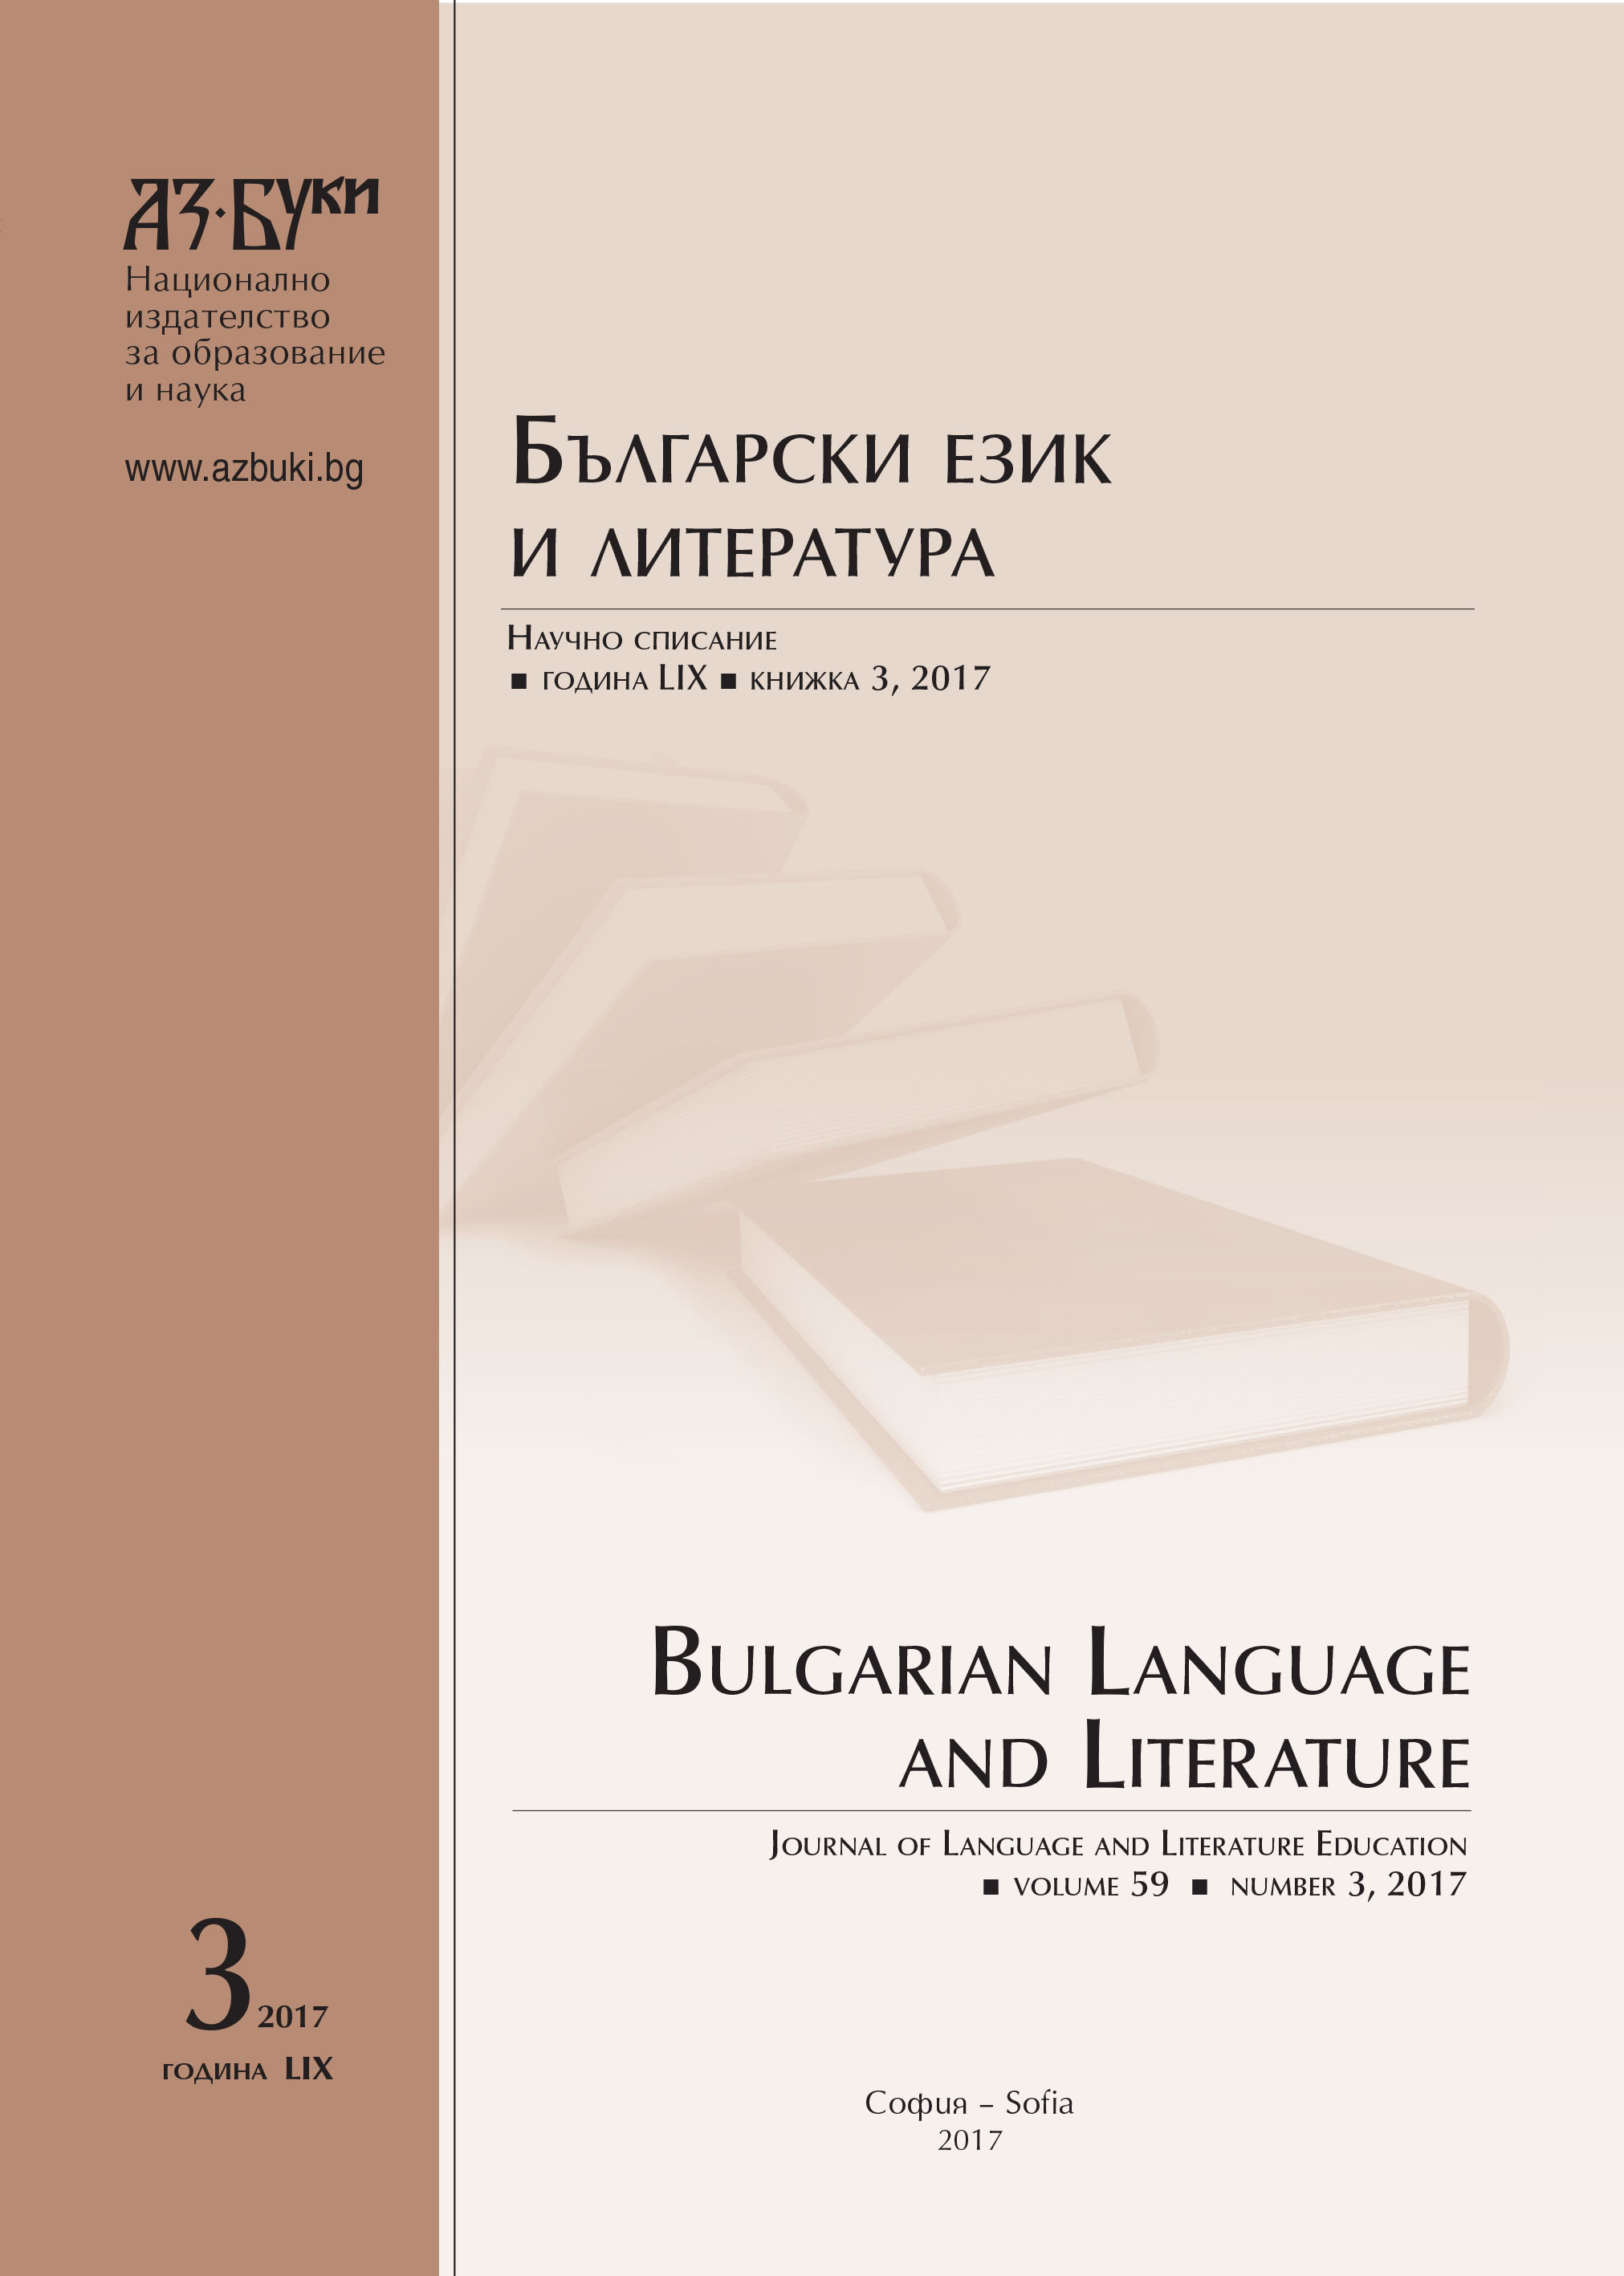 The Differences in Word Order between the Bulgarian and Russian – Source of Syntactic Interference Cover Image